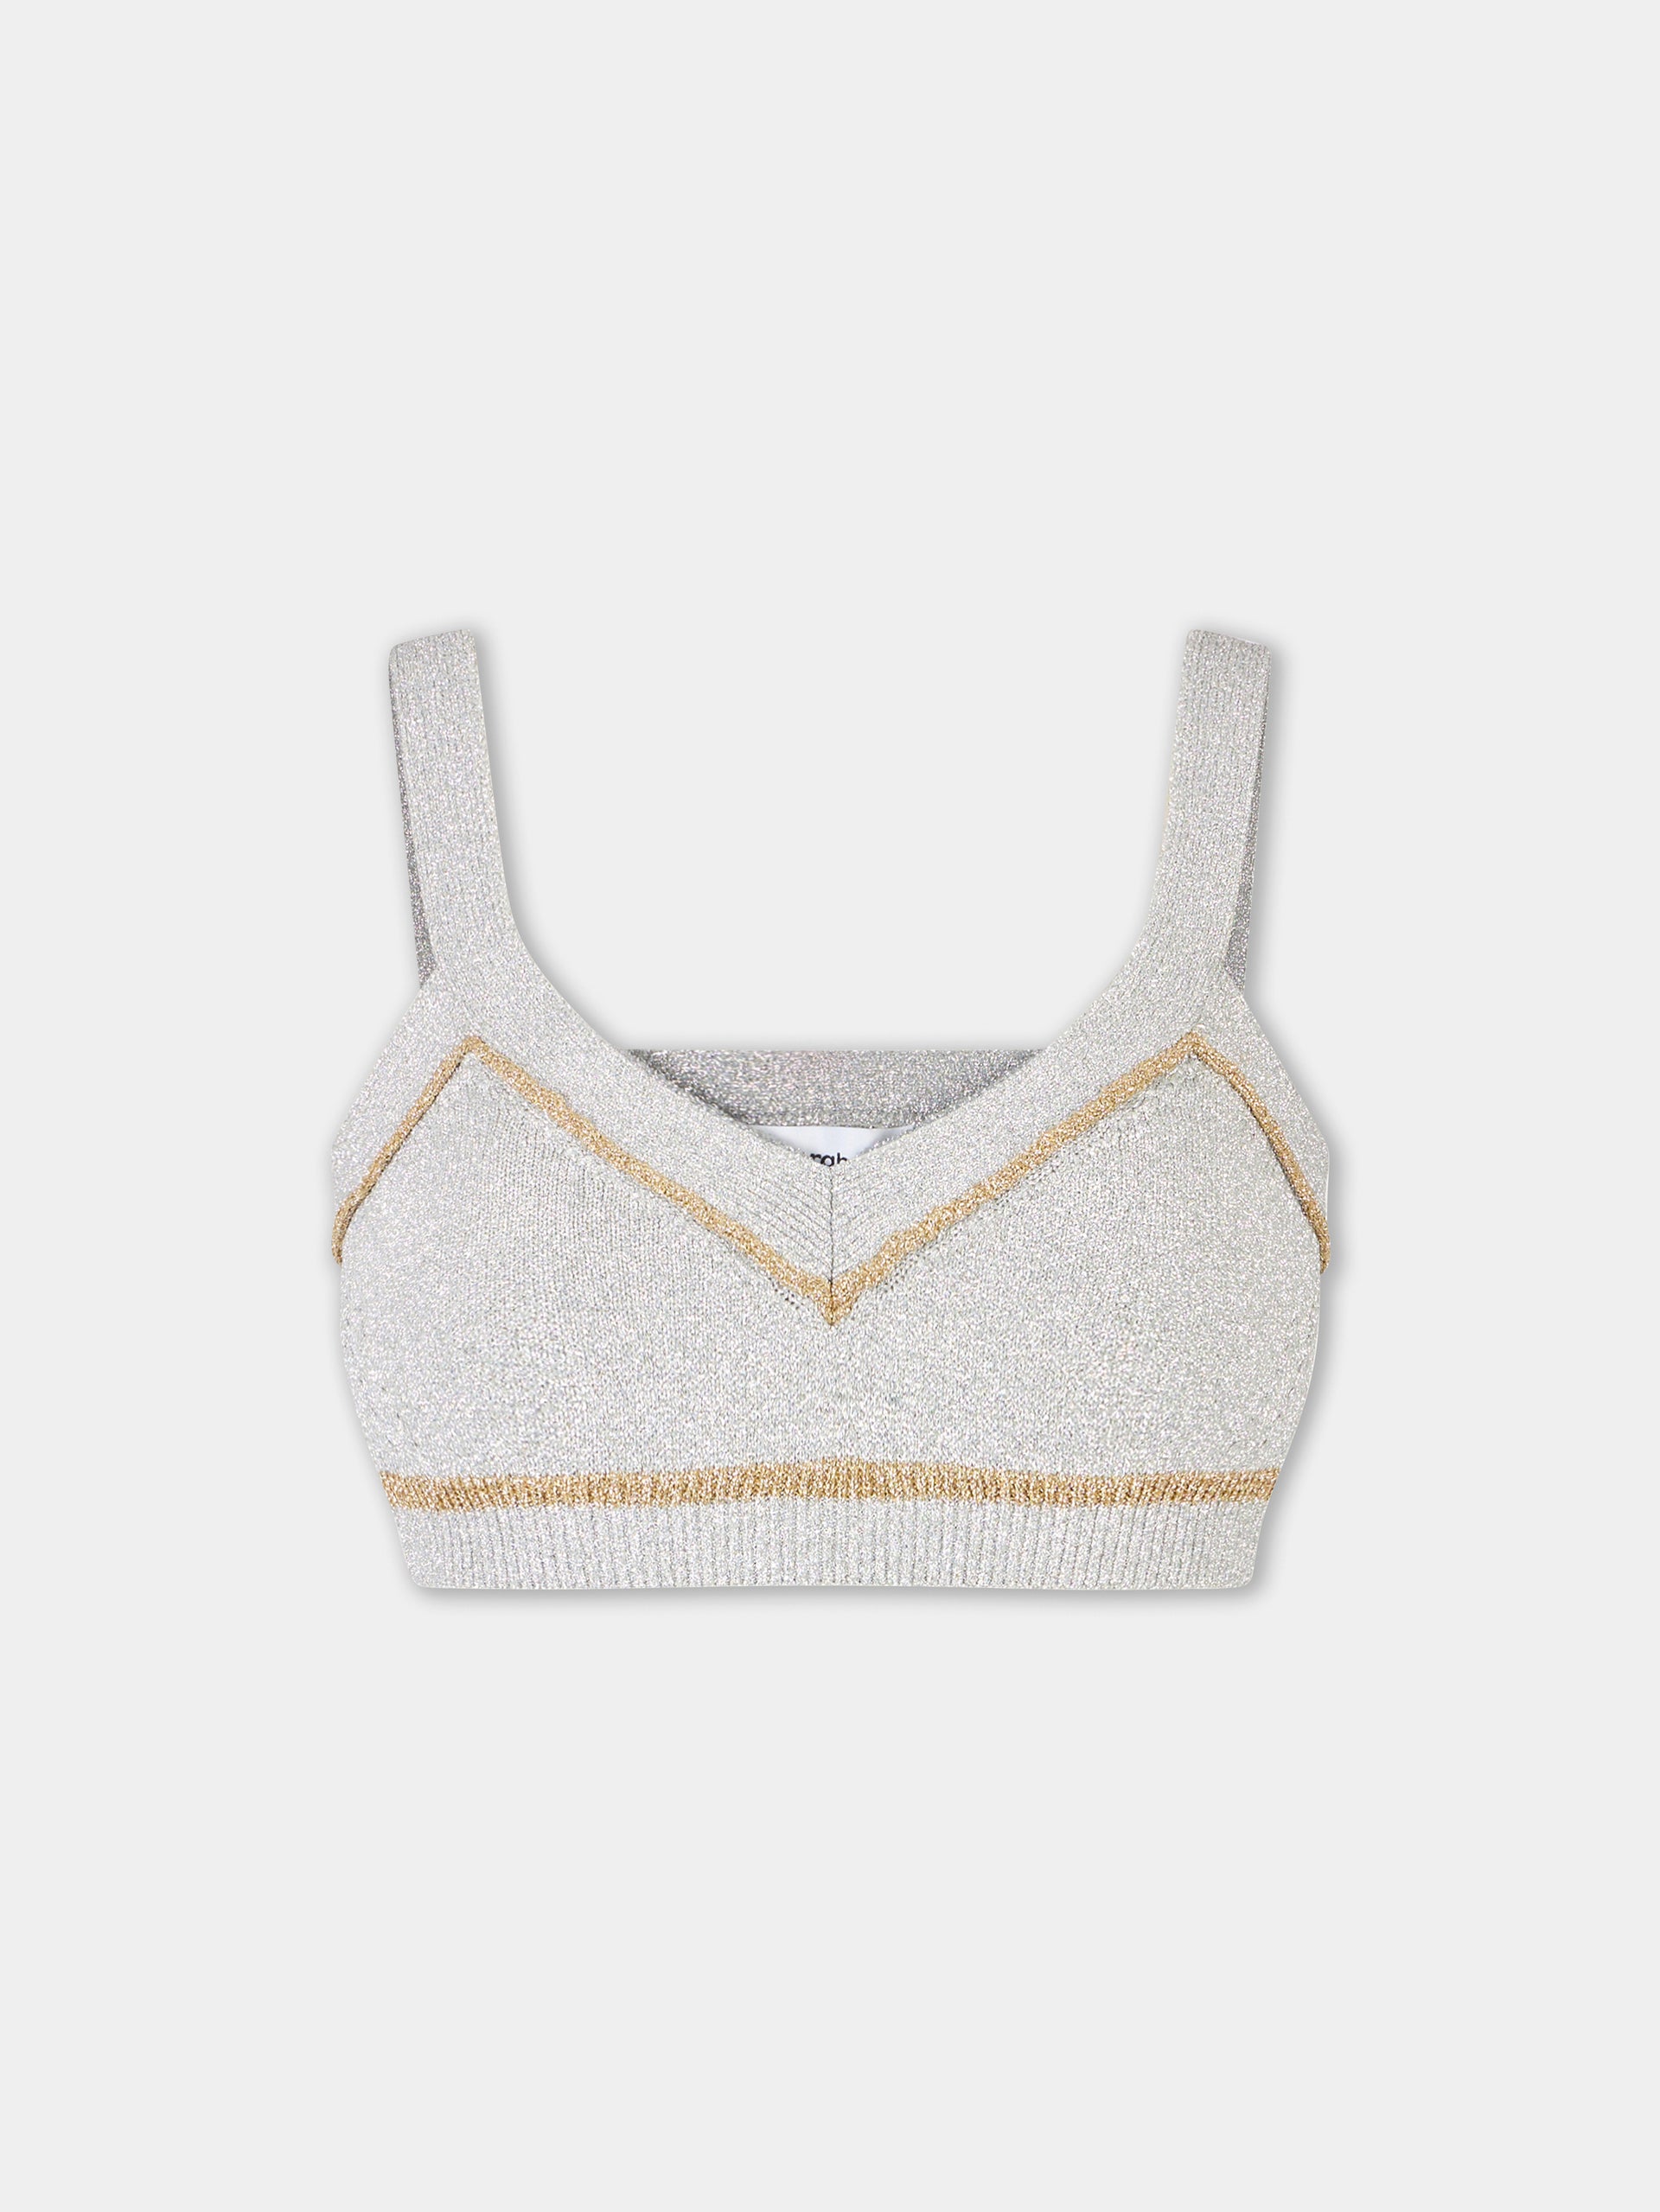 Gold and Silver Crop Top